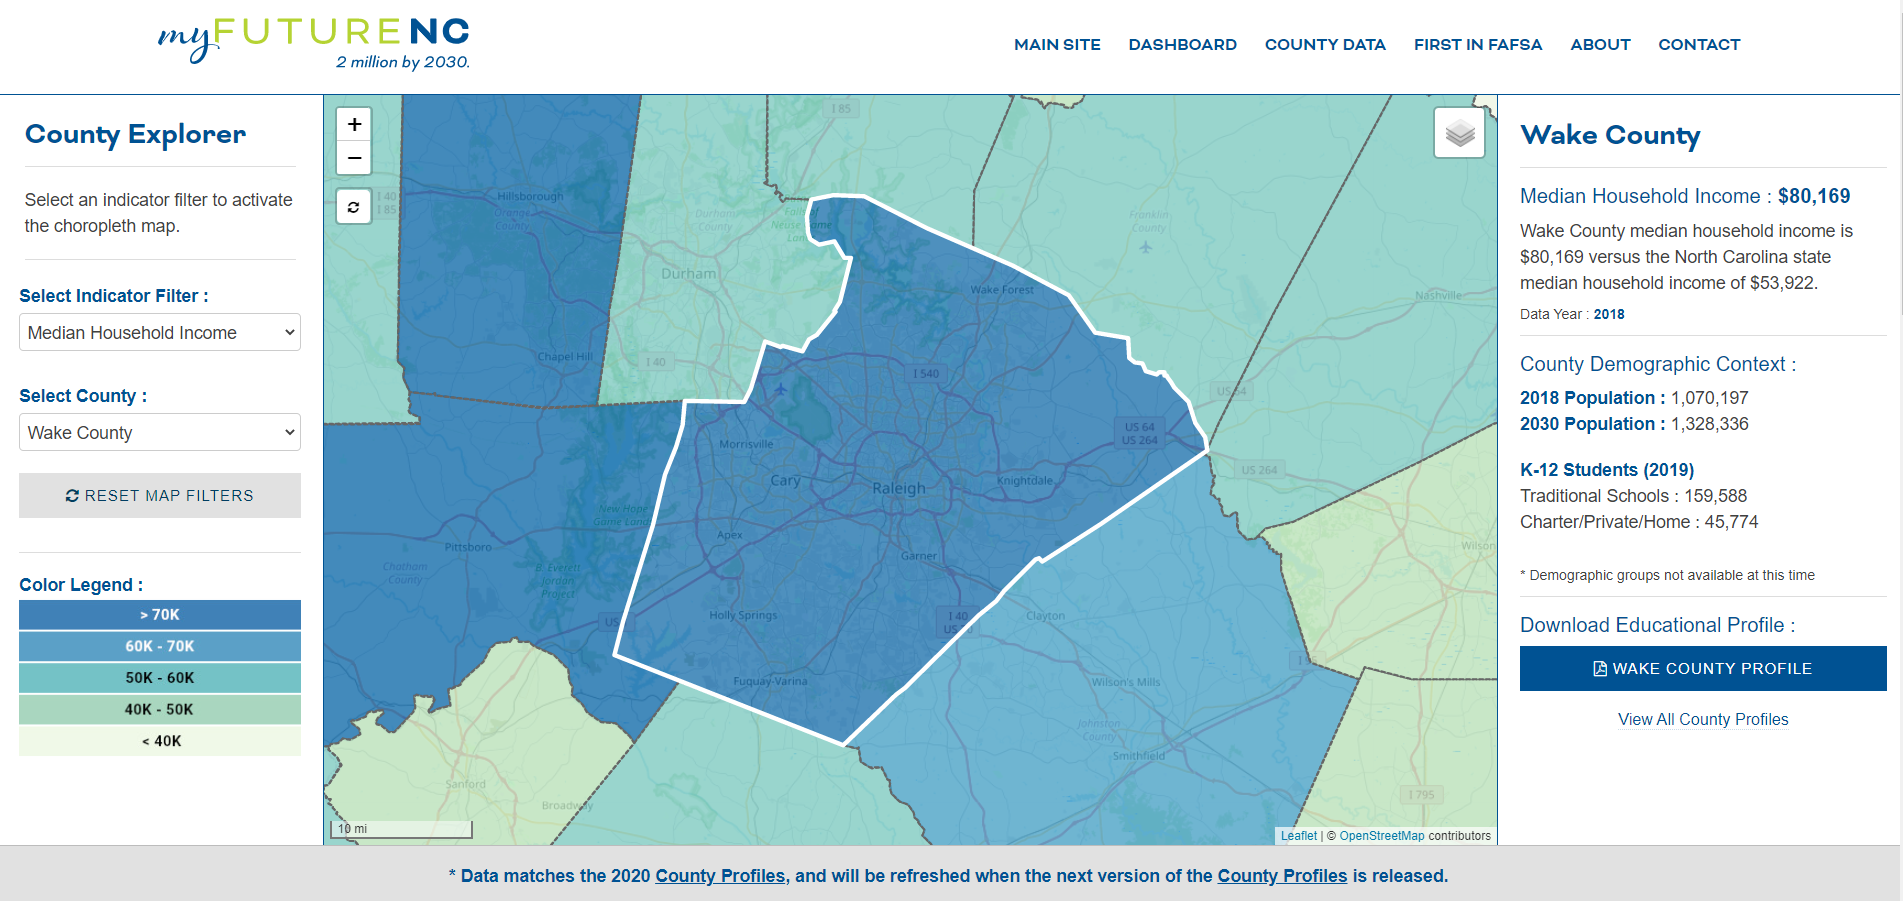 screen capture from the MFNC county explorer tool. Image shows a choropleth and Wake county highlighted to show county specific information and surrounding household income level.